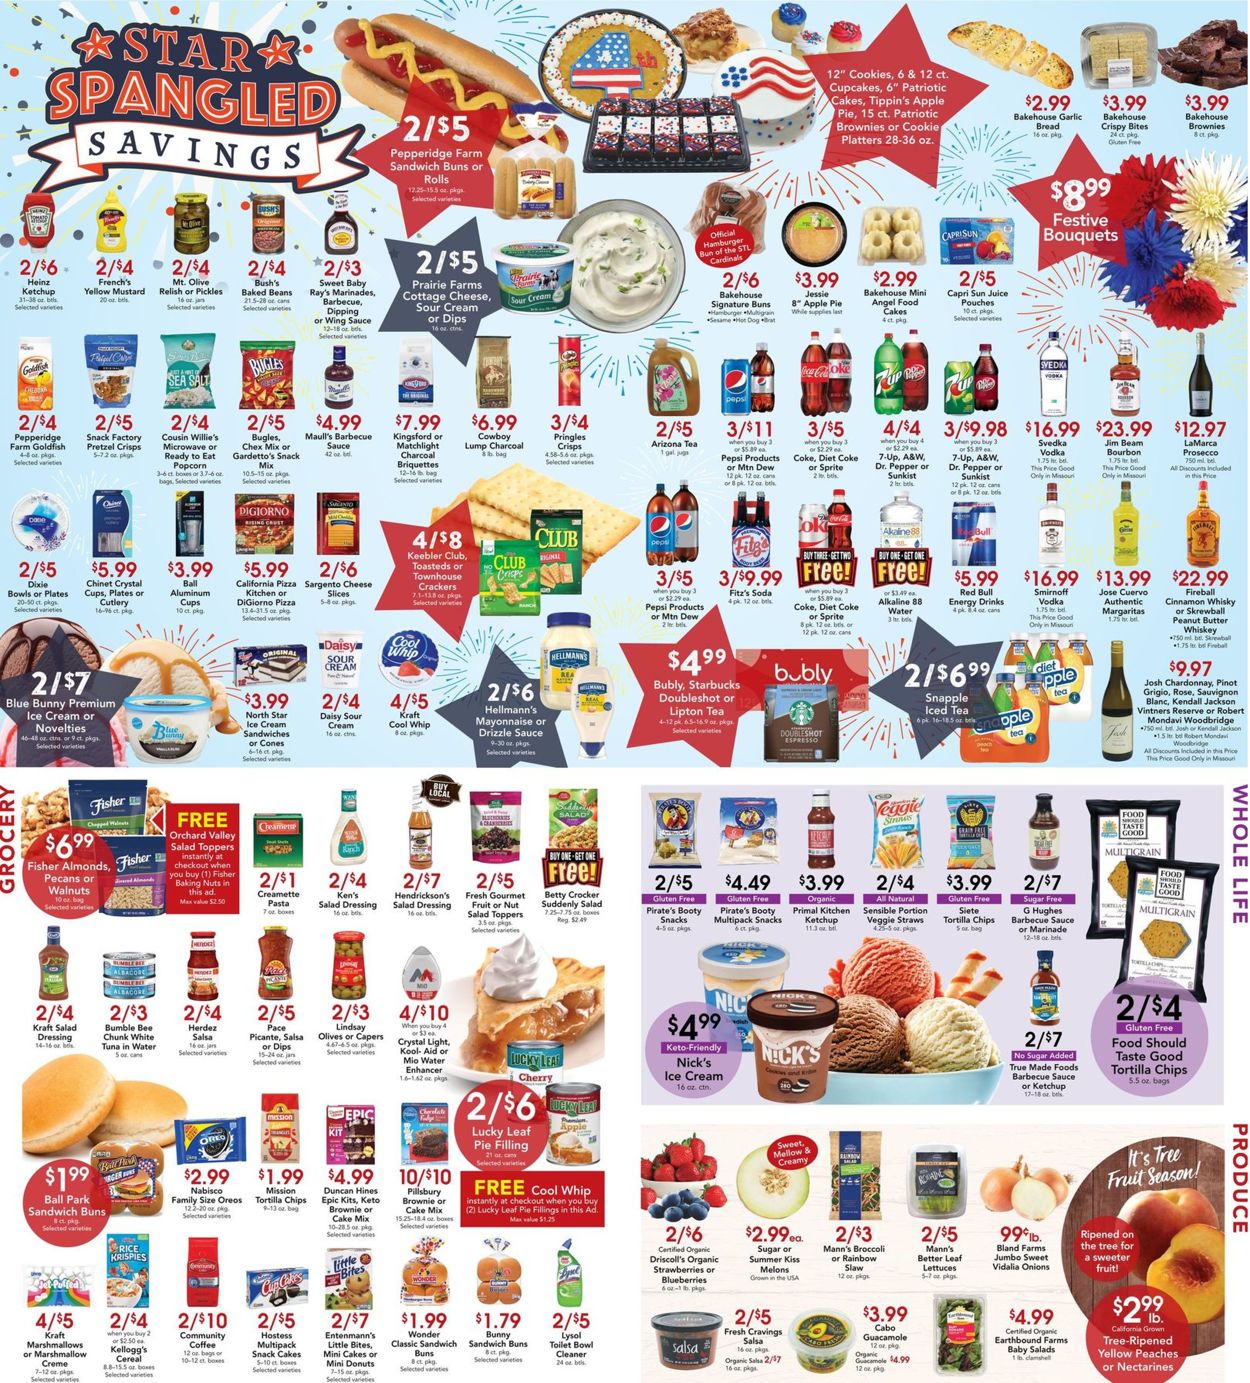 Catalogue Dierbergs from 06/29/2021